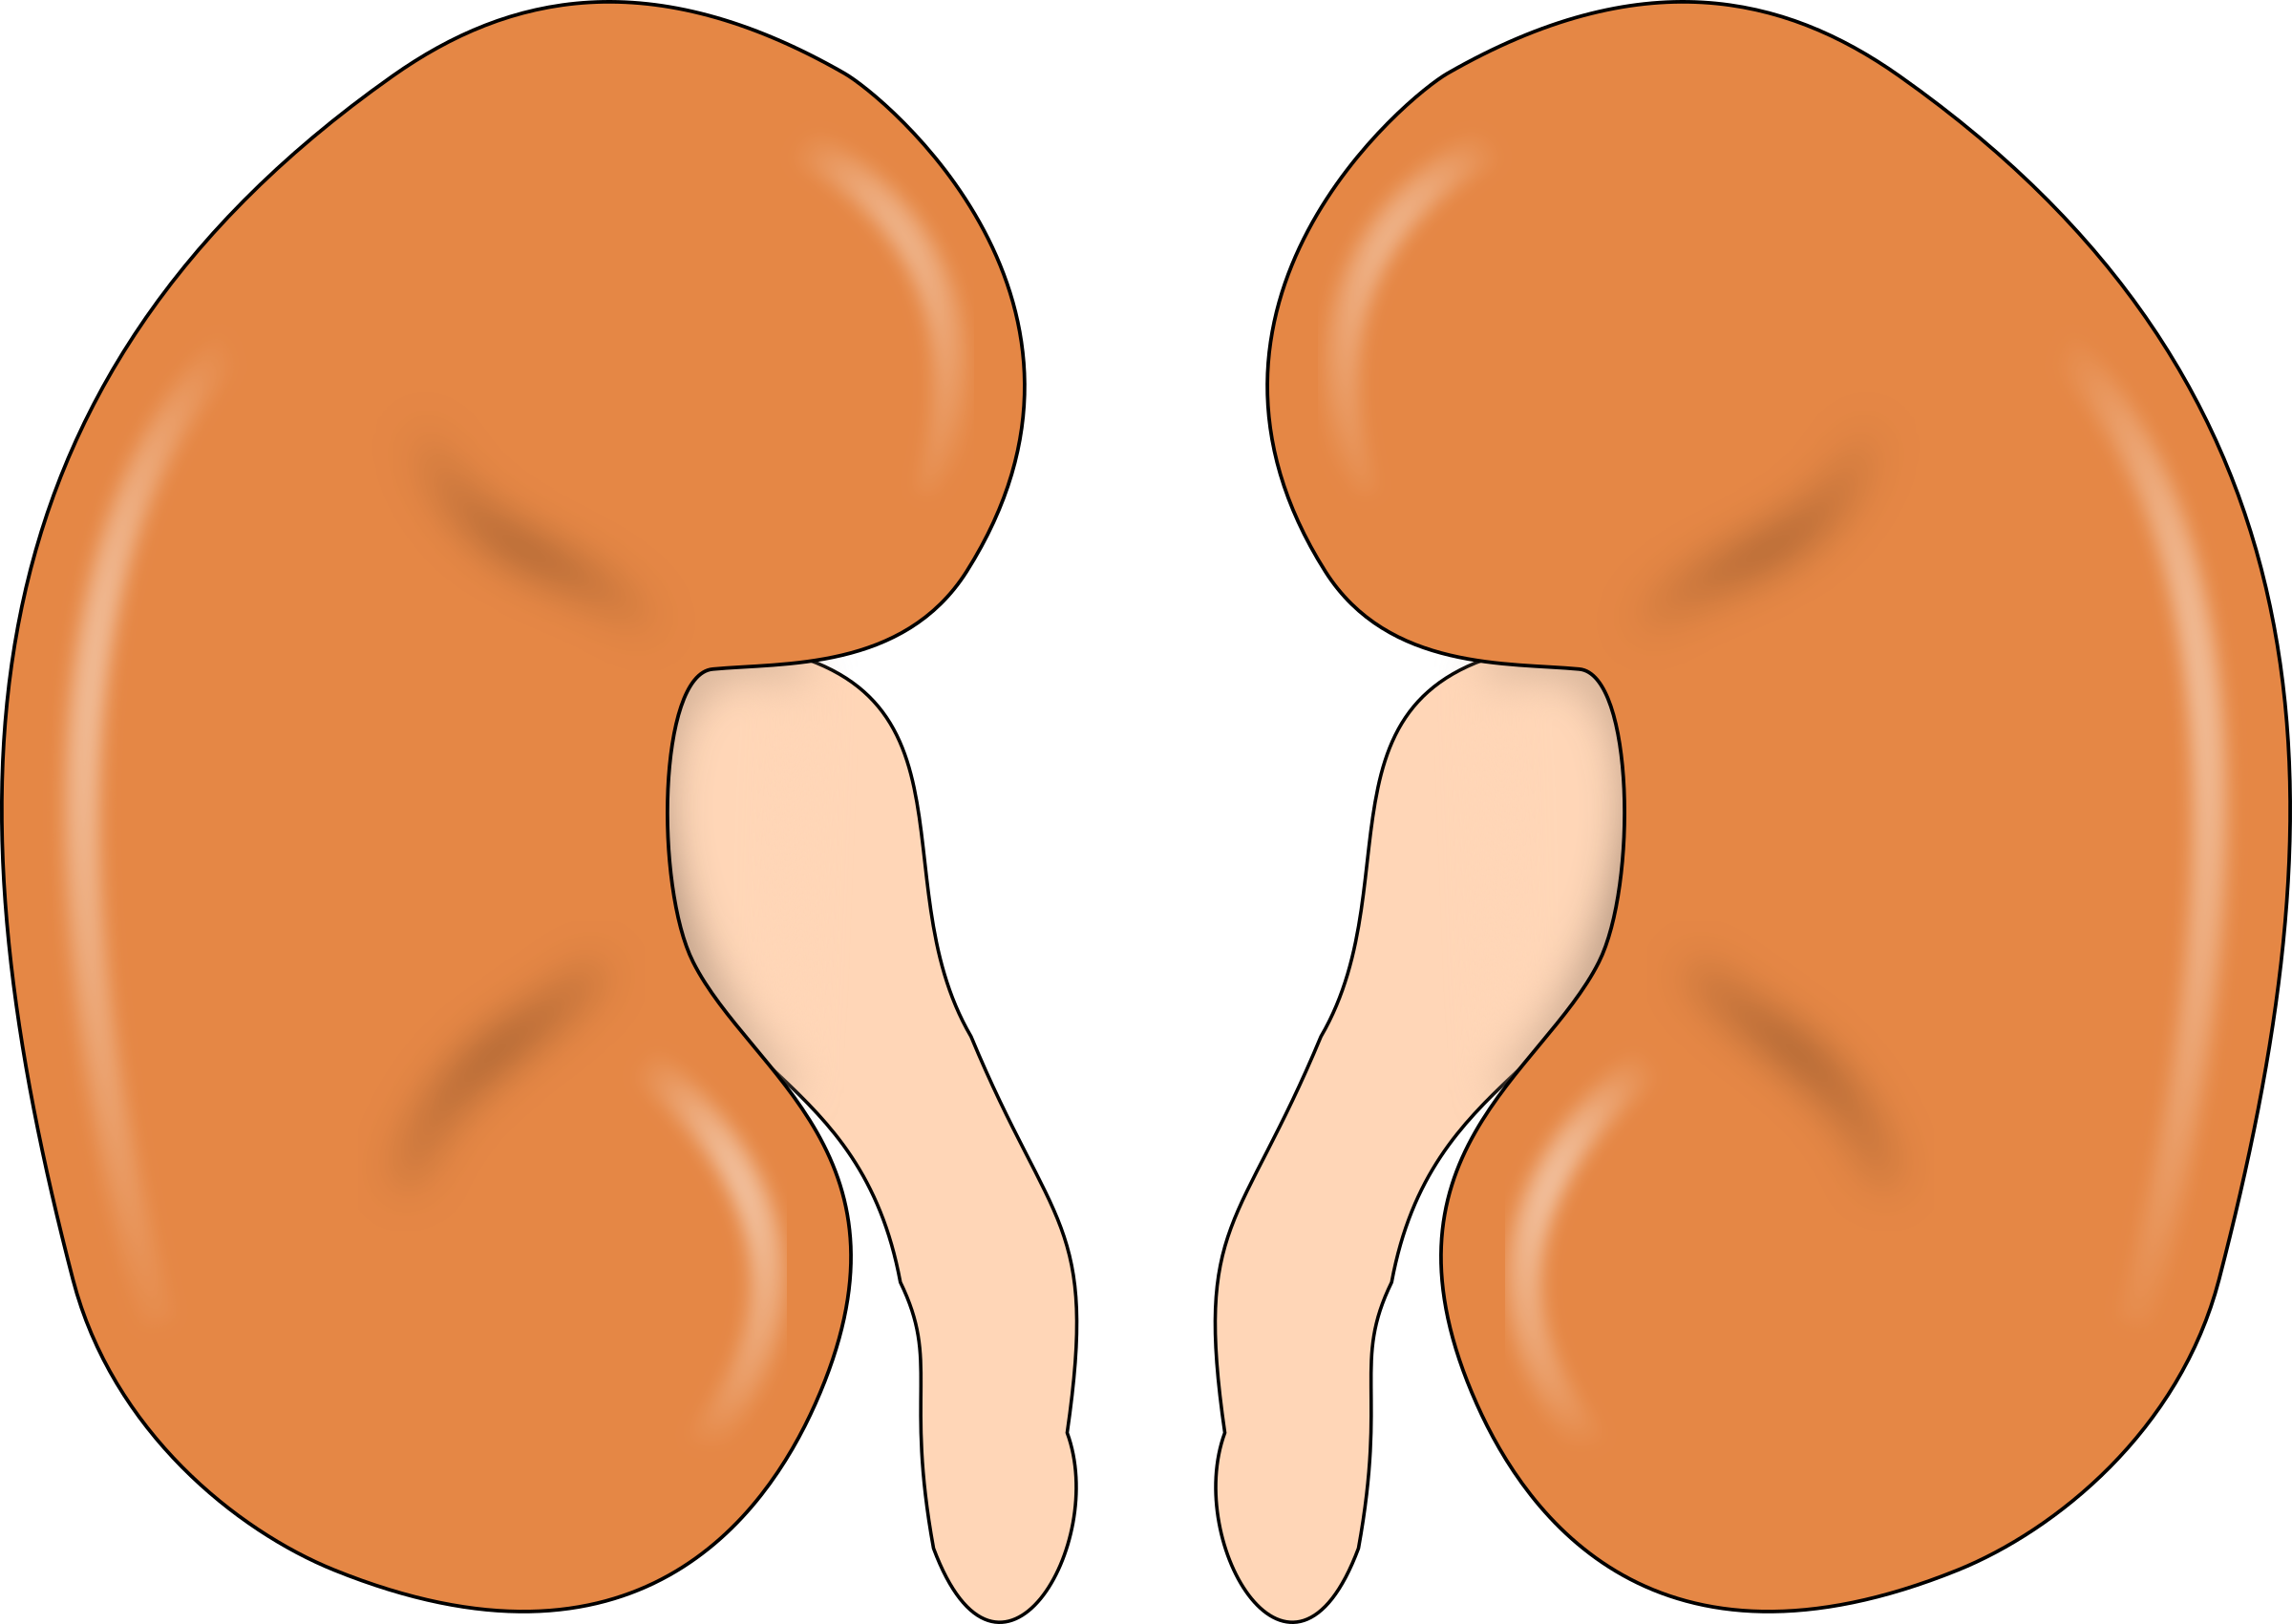  collection of organ. Kidney clipart sketch